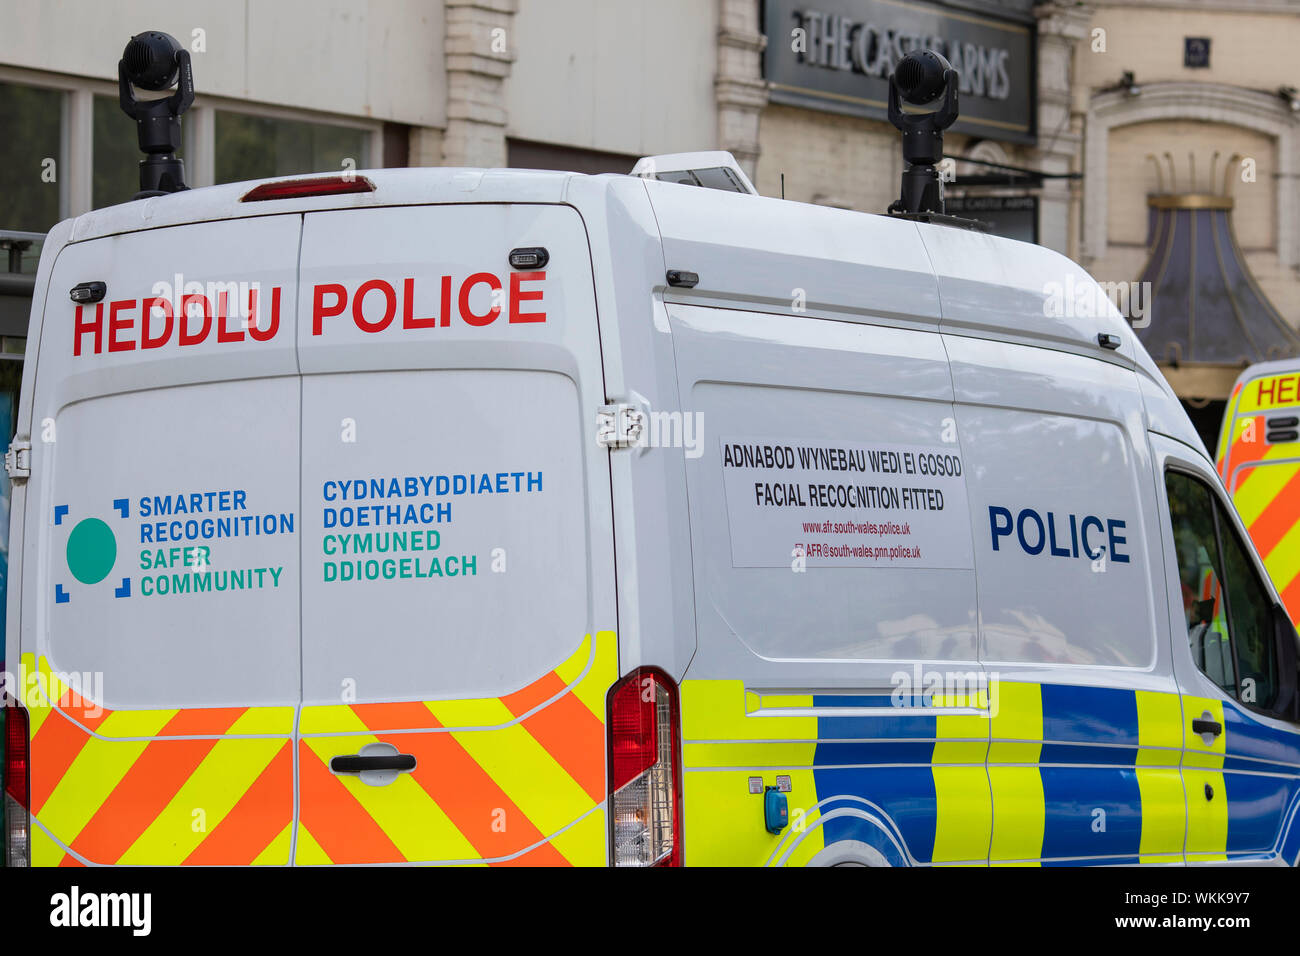 Who's - South Wales Police Cardiff and Vale of Glamorgan